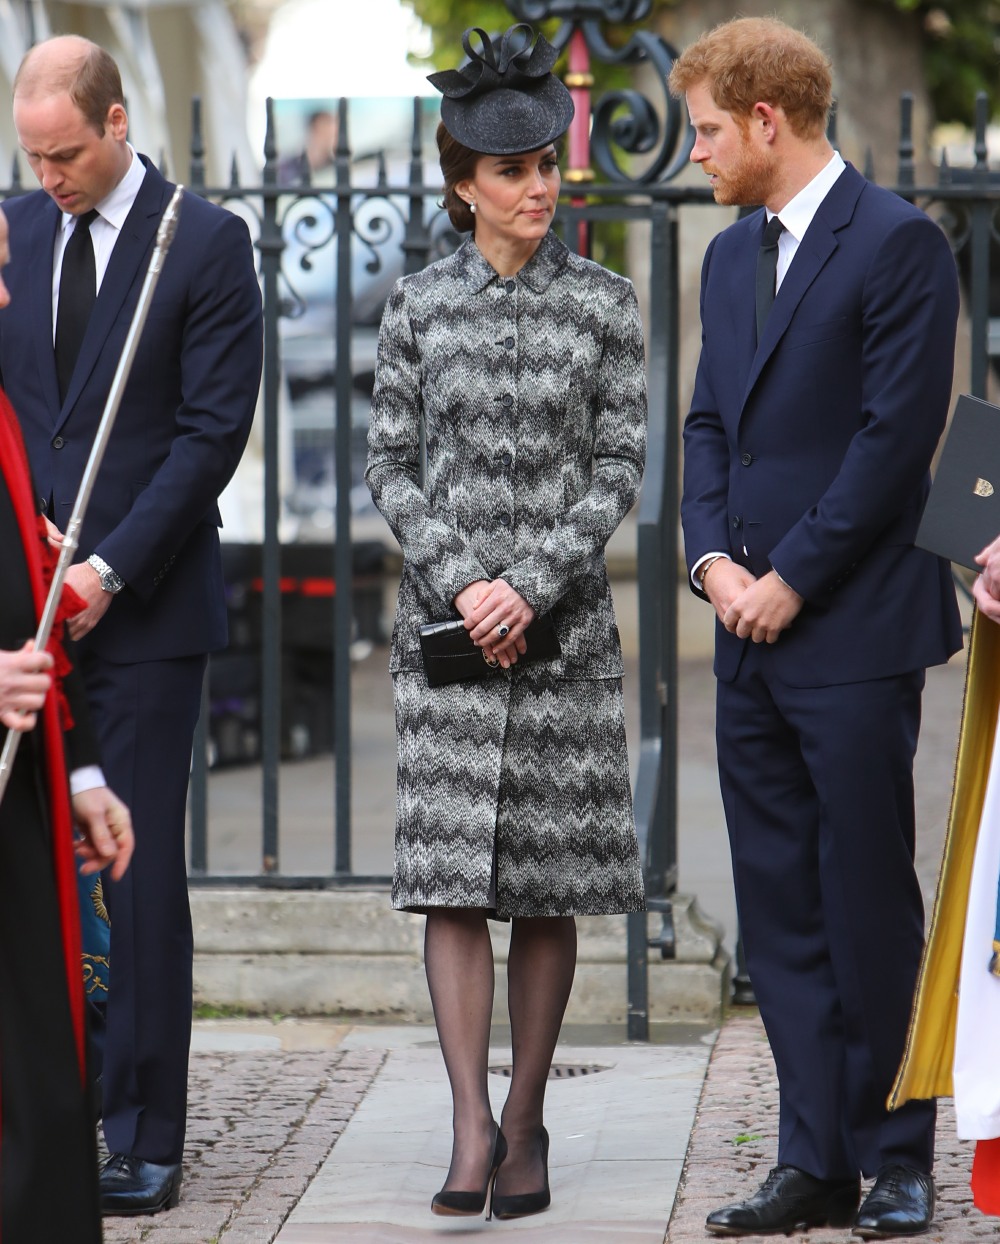 The Duke and Duchess of Cambridge attend Service at Westminster Abbey